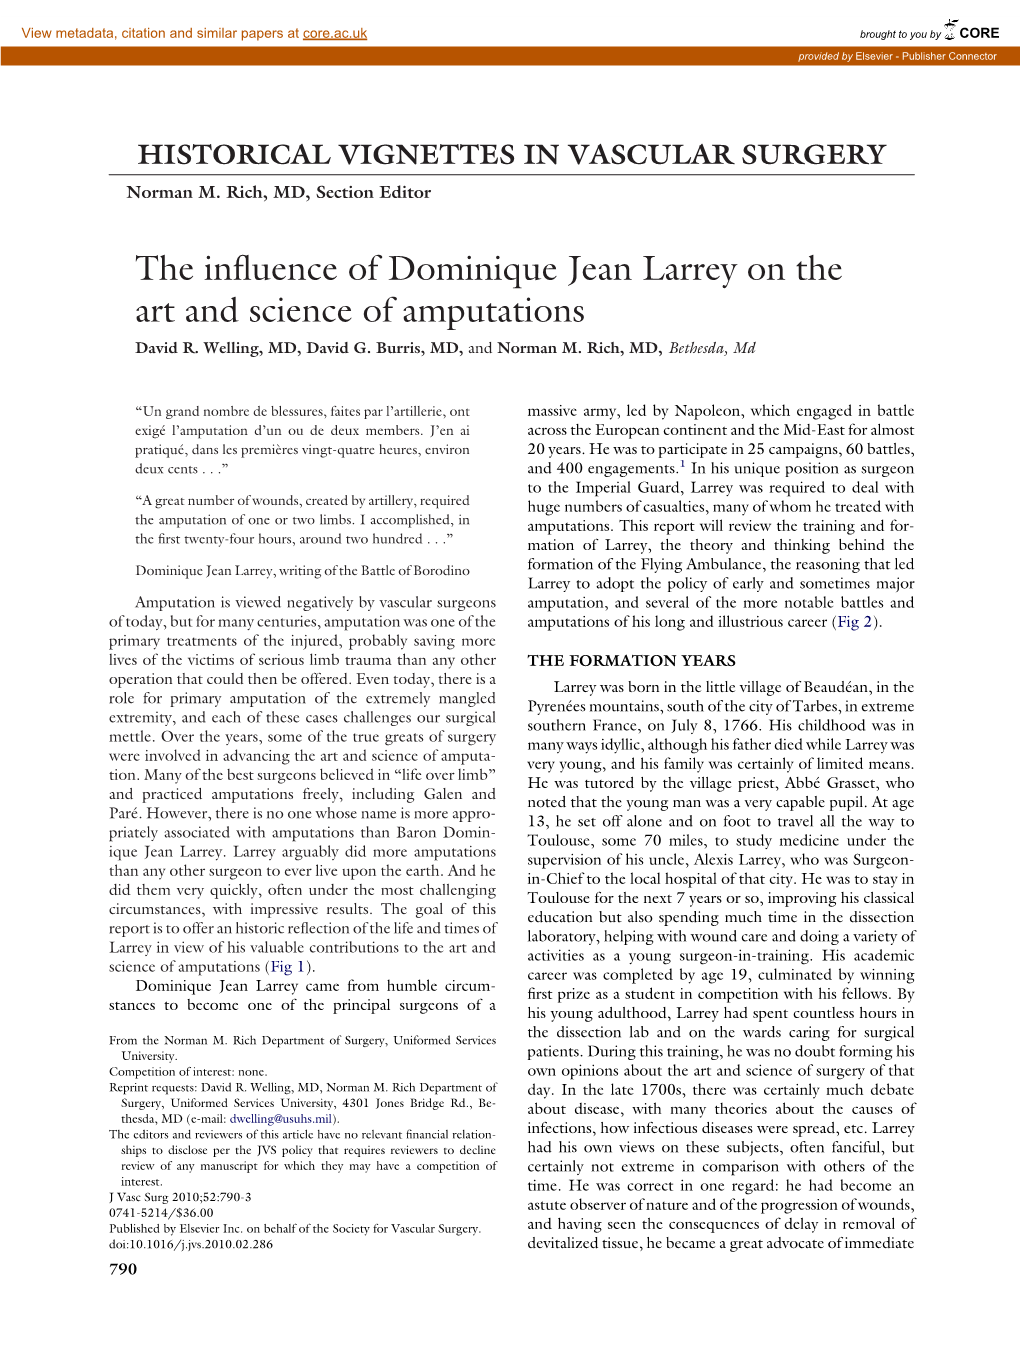 The Influence of Dominique Jean Larrey on the Art and Science of Amputations